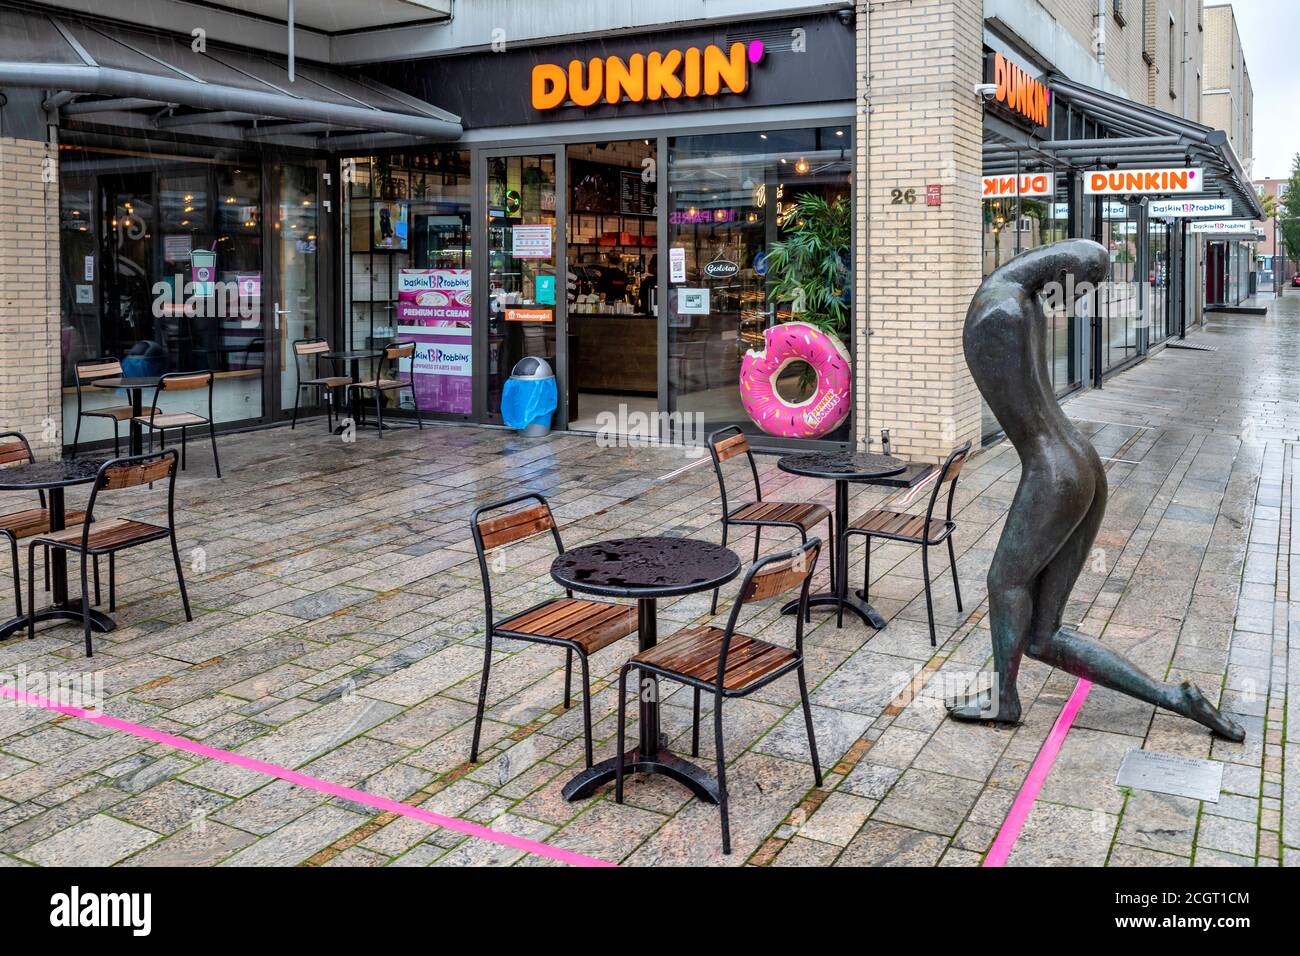 Dunkin’ Donuts branch in Almere, The Netherlands. Dunkin’ is an American multinational coffee and doughnut company. Stock Photo